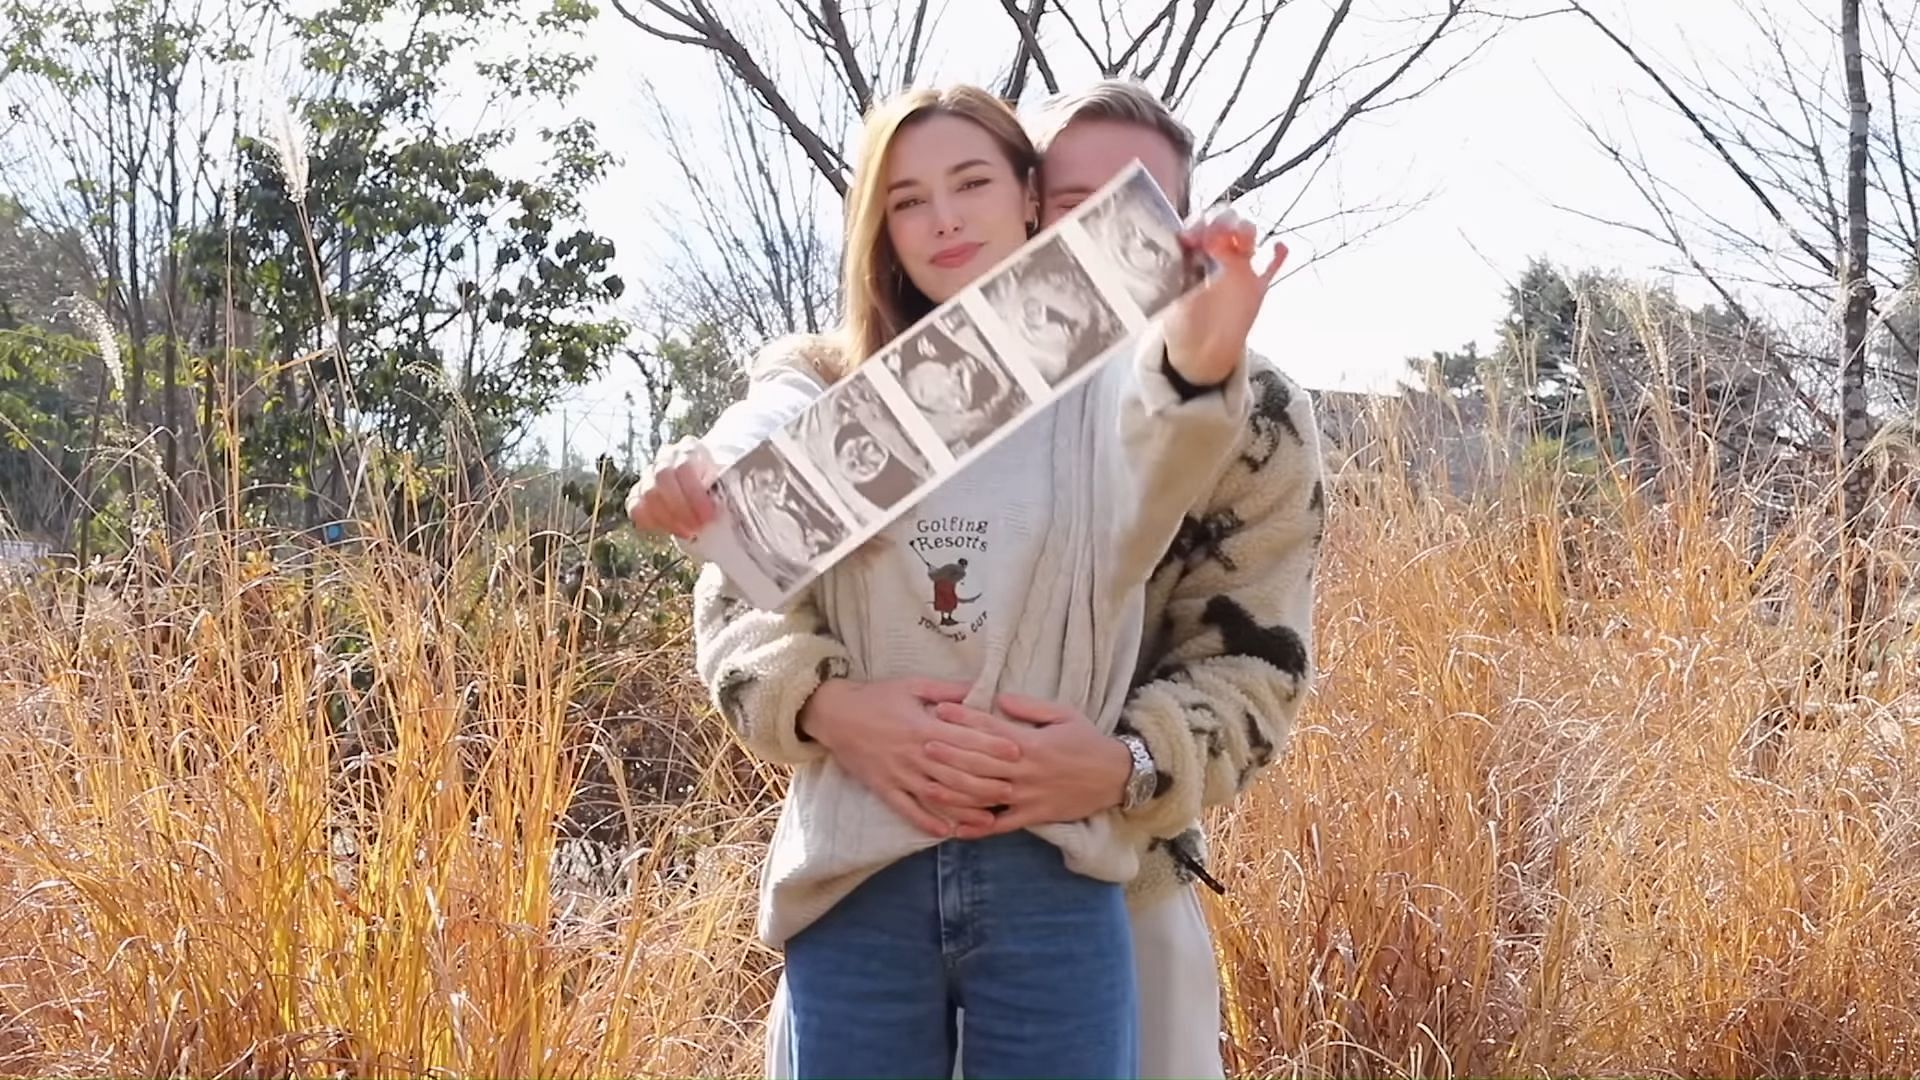 PewDiePie and Marzia are expecting a child (Image via YouTube)